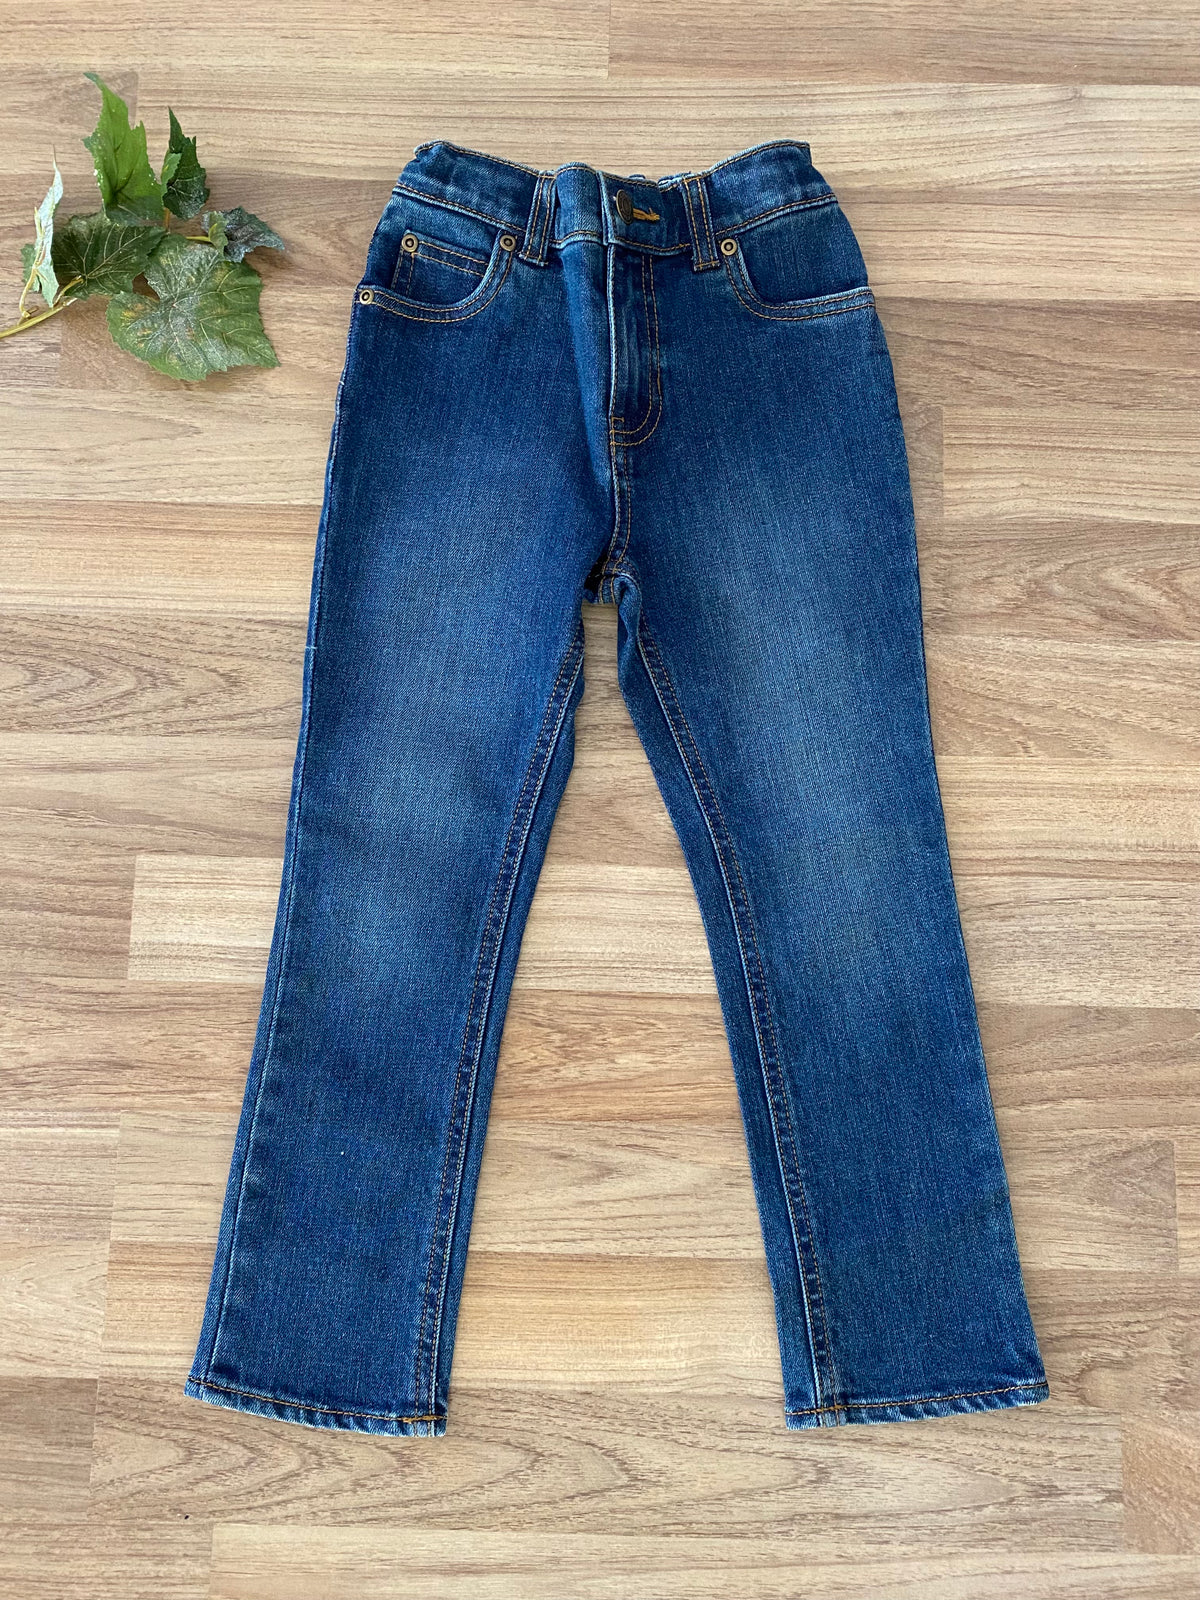 Jeans (Girls Size 5)